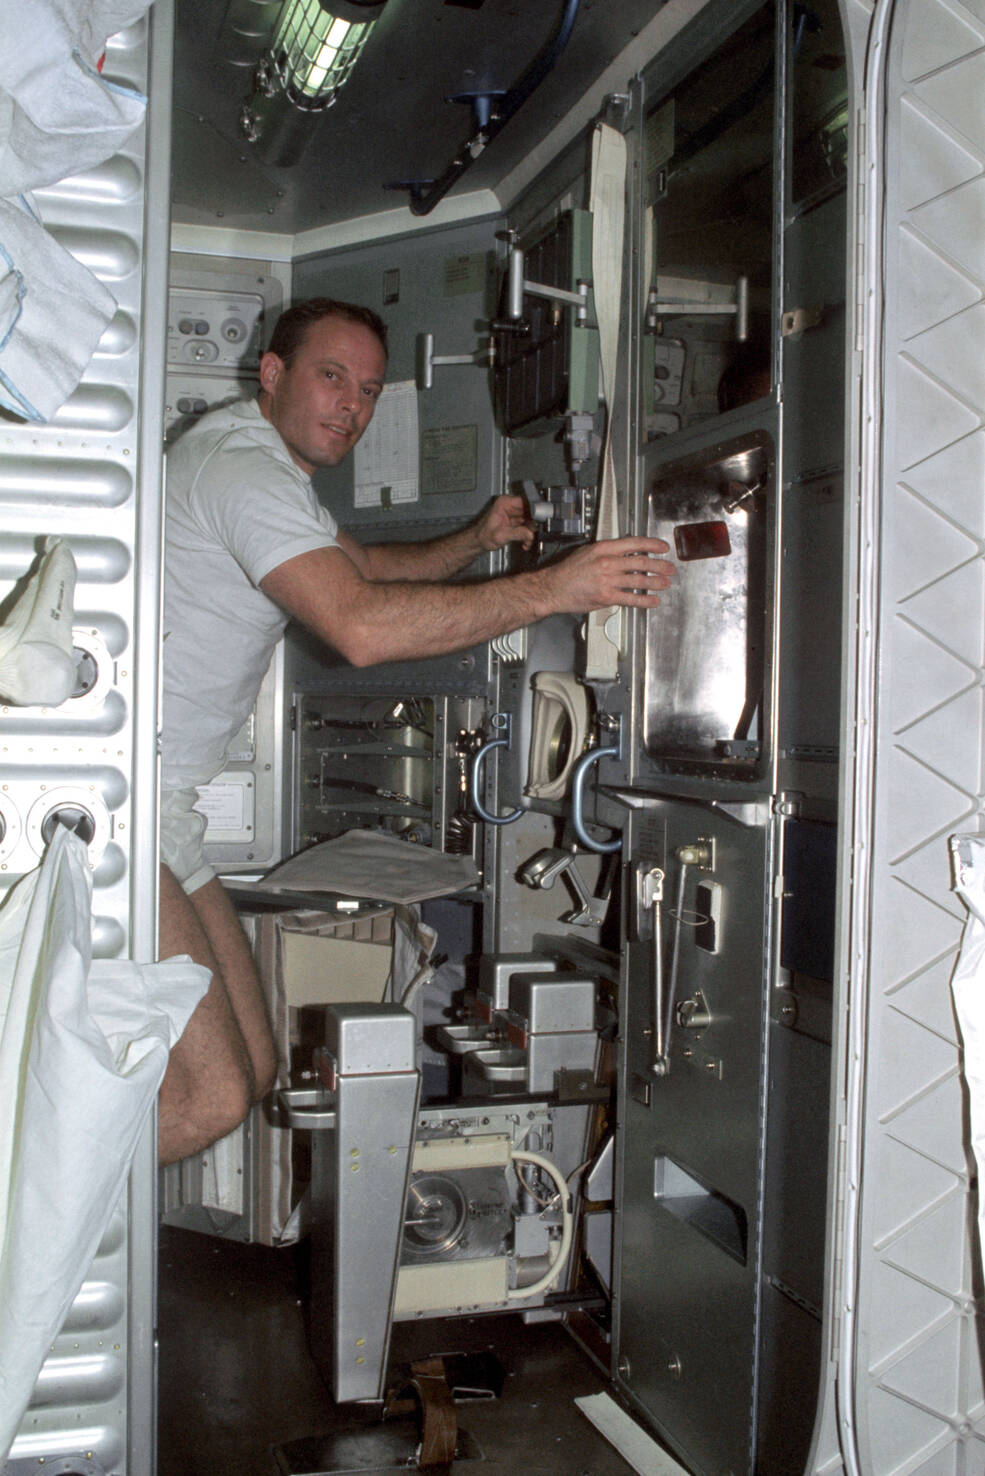 Skylab 3 astronaut Jack R. Lousma works at the Waste Collection System